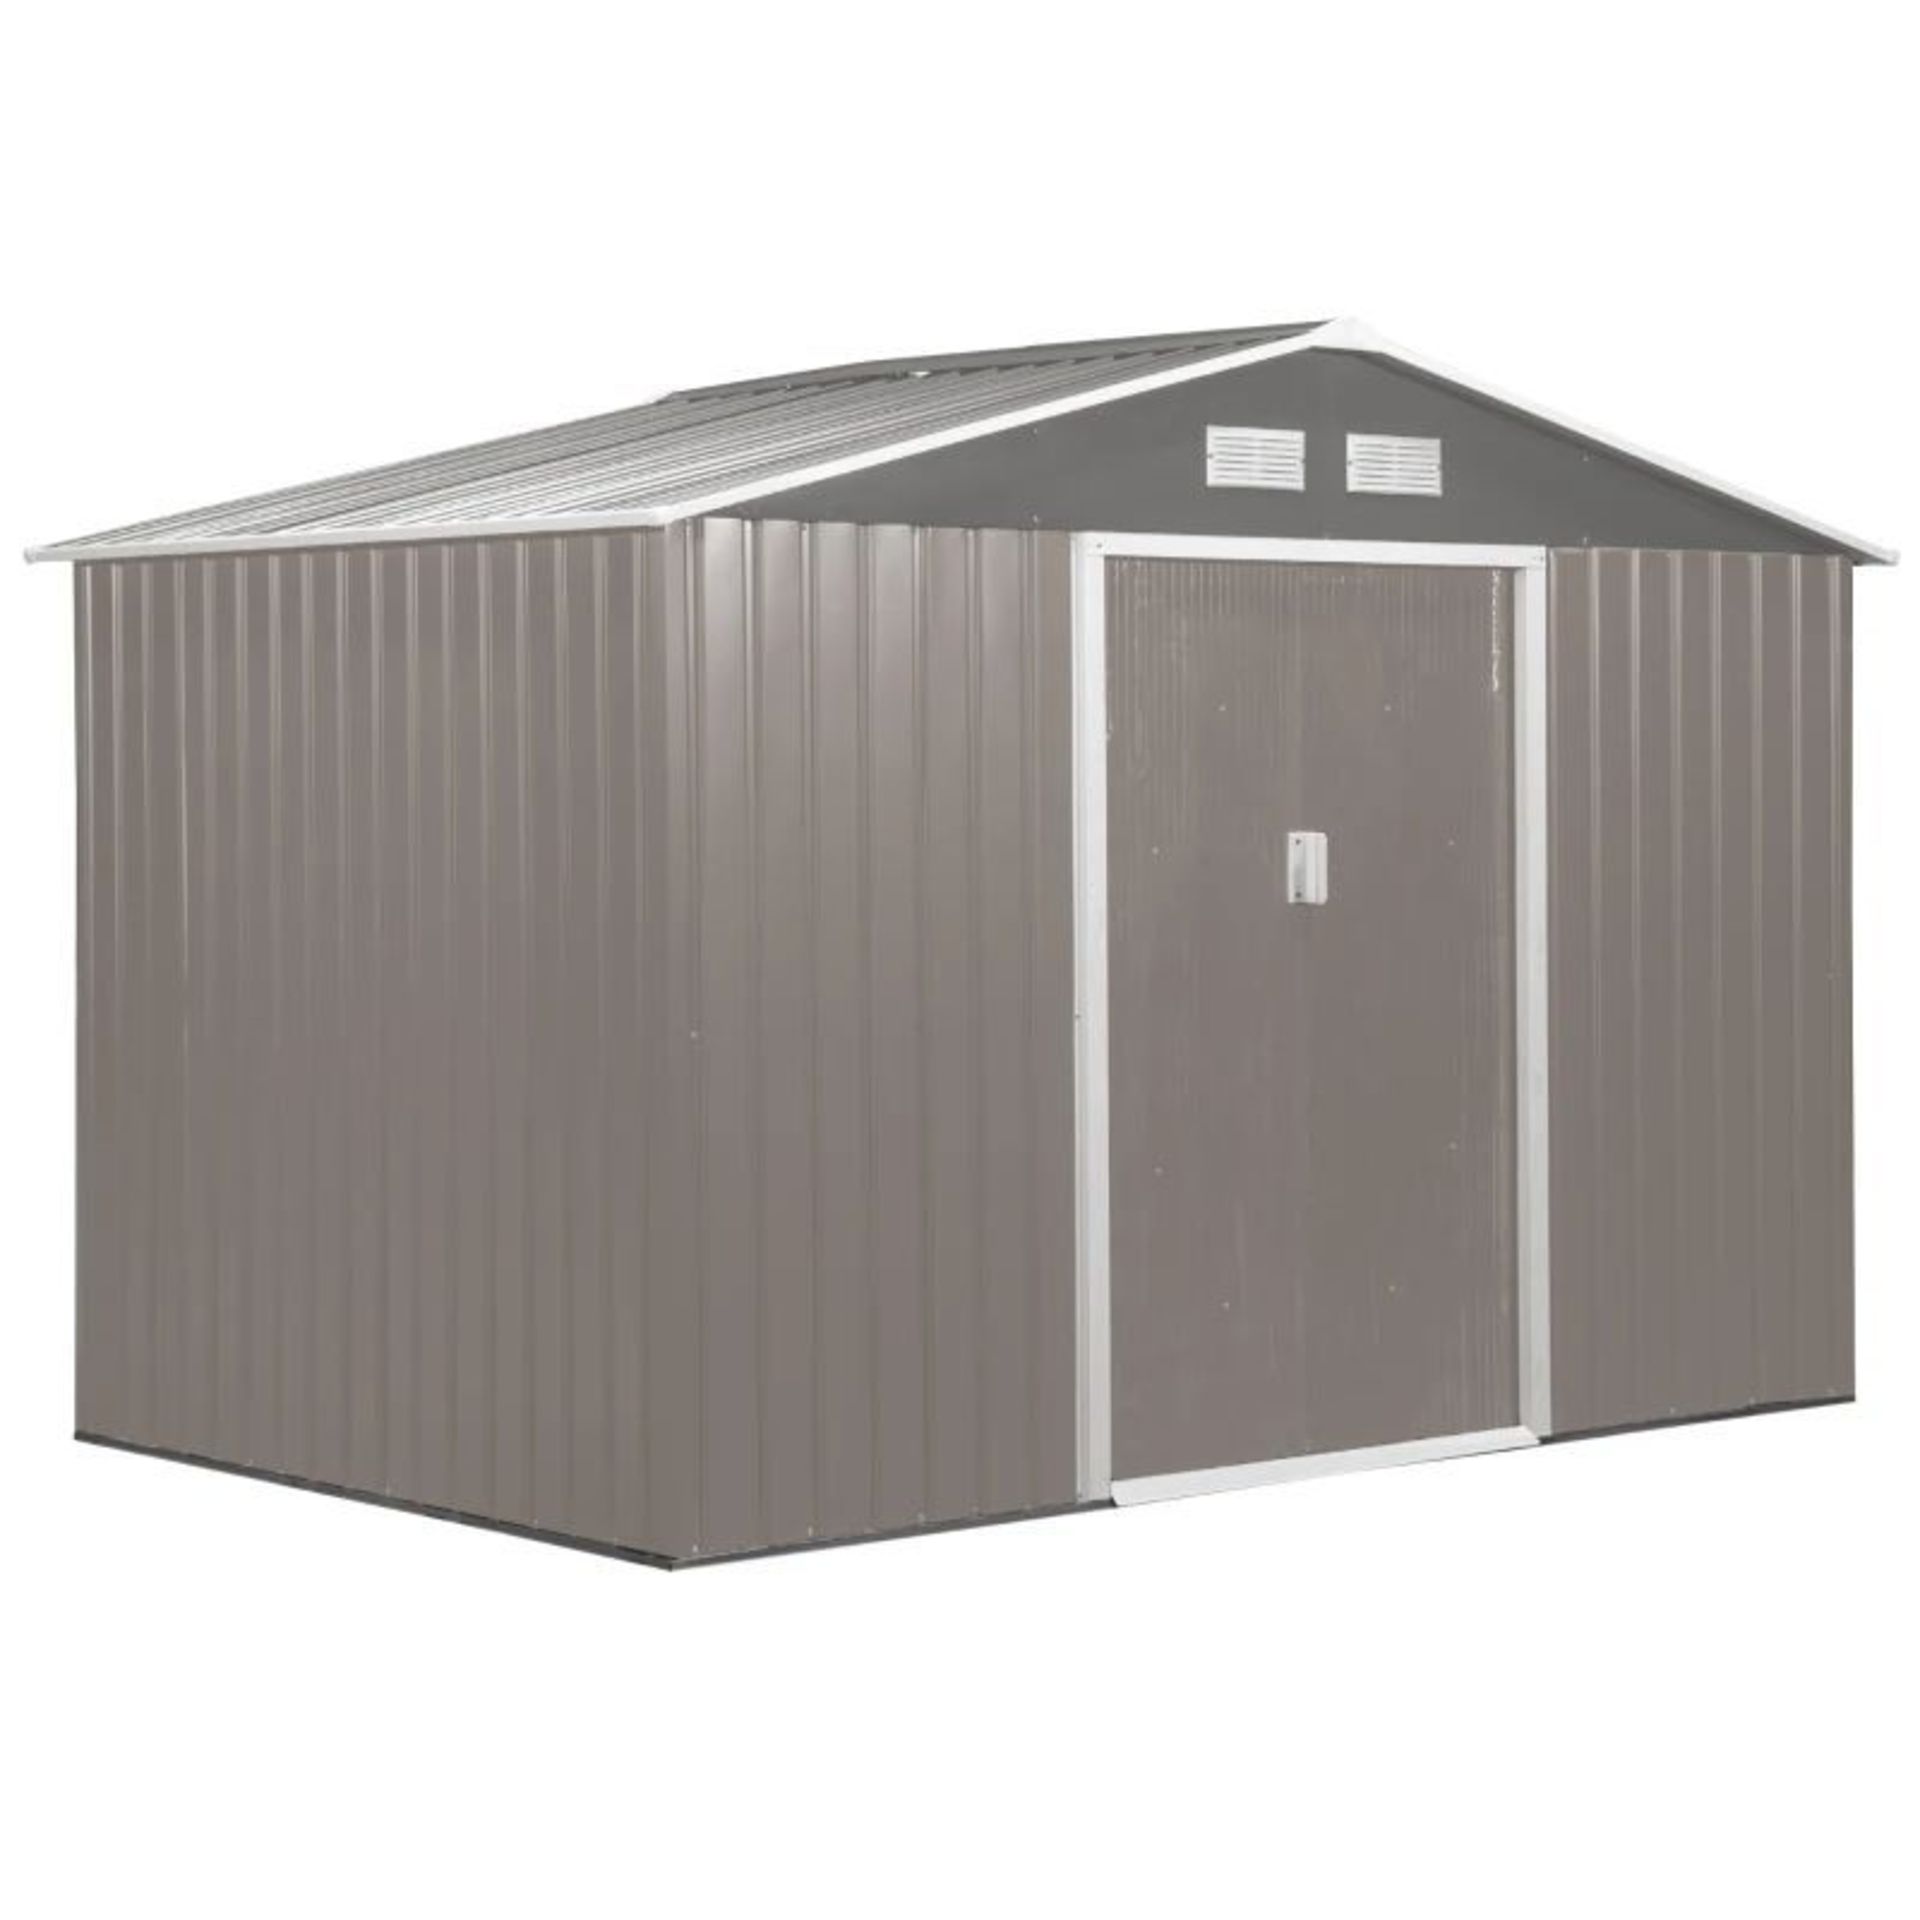 Outsunny 9 x 6FT Outdoor Garden Roofed Metal Storage Shed Tool Box with Foundation Ventilation & - Image 3 of 4